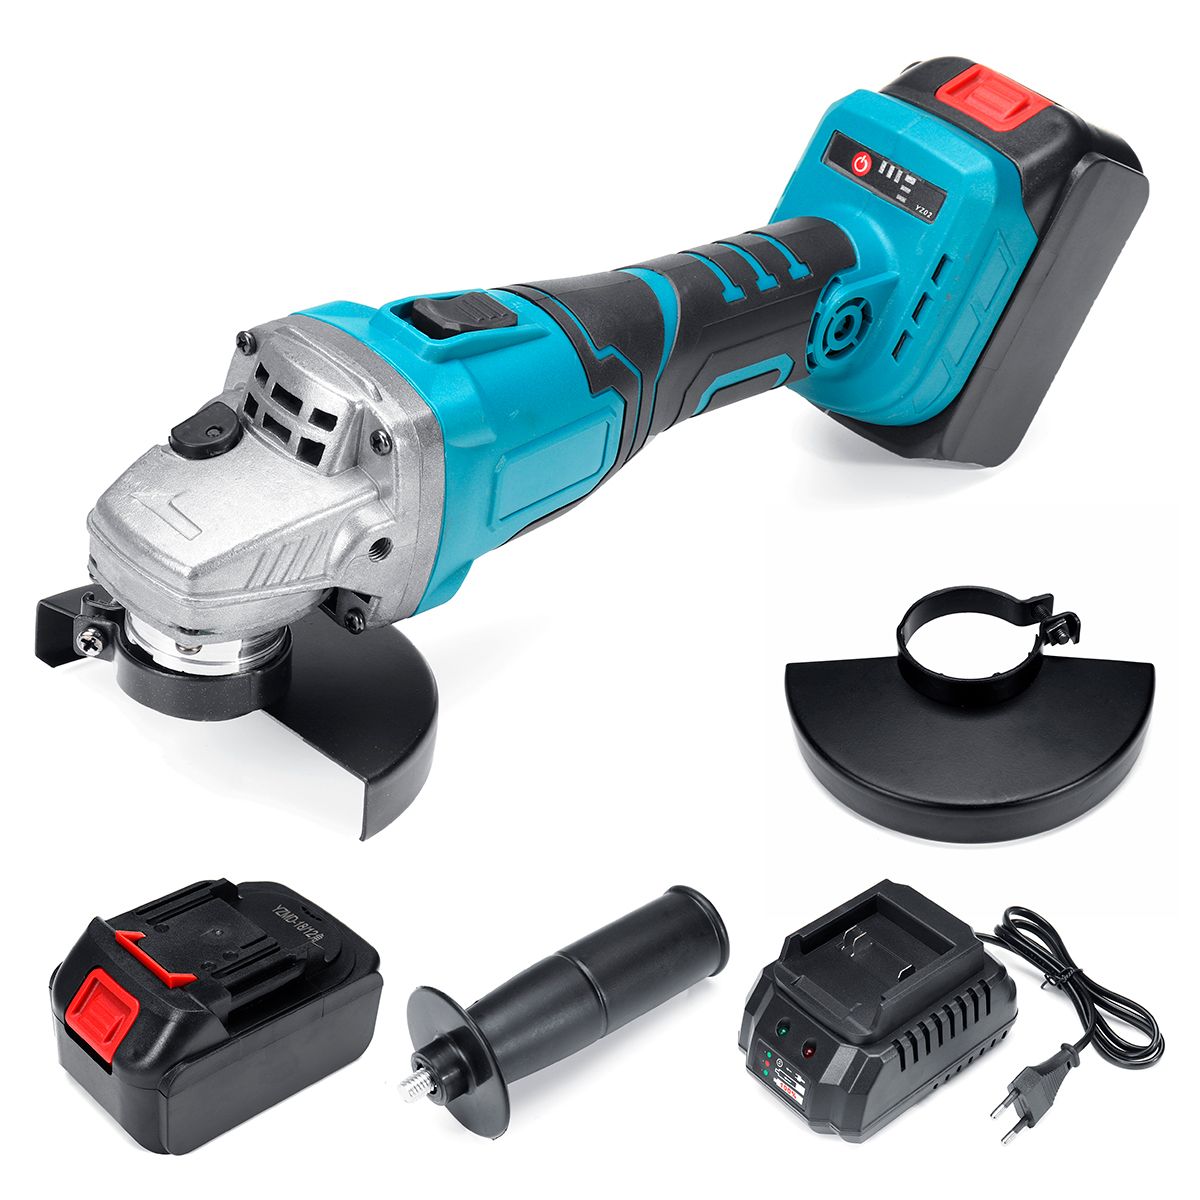 40V-128TV-29800mA-Electric-Angle-Grinder-Cordless-Grinding-Machine-Power-Cutting-Tool-Set-1518610